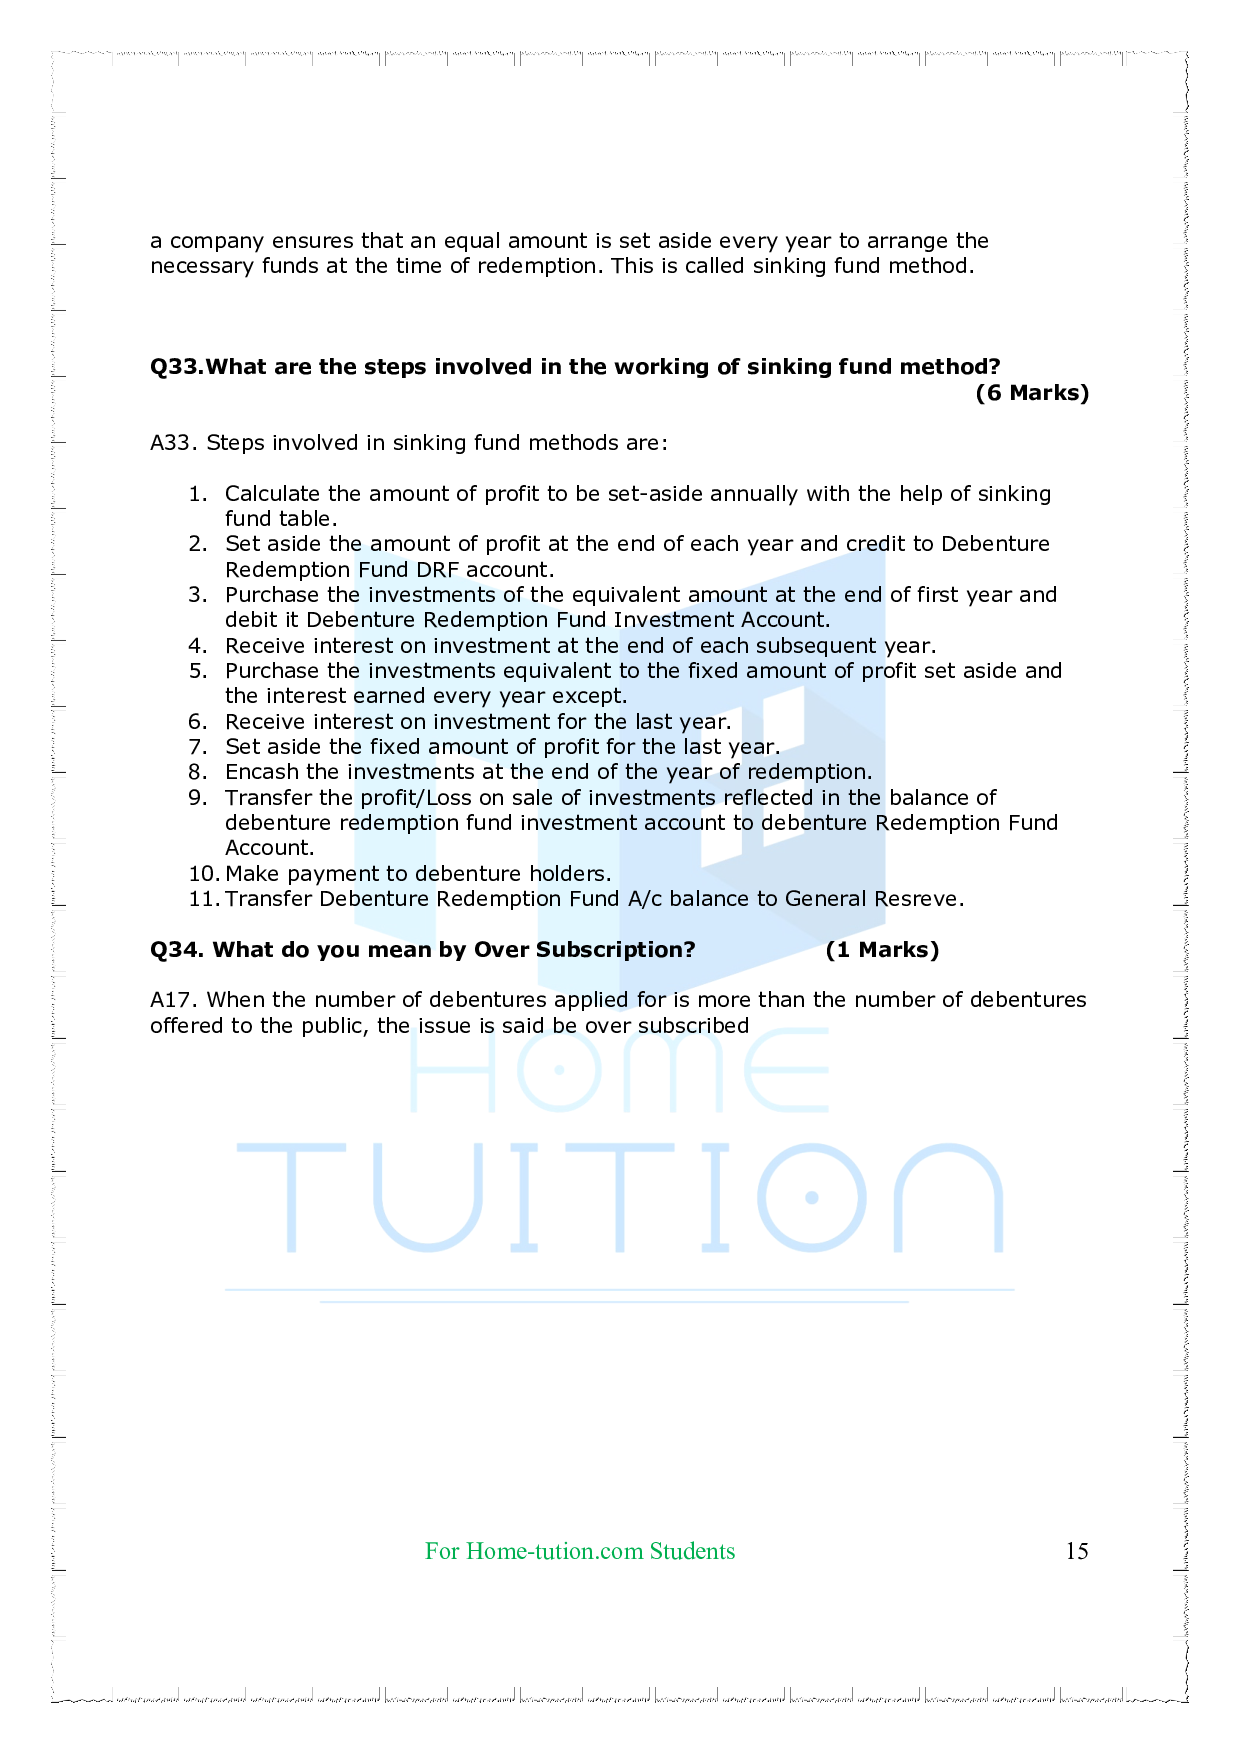 Chapter-Chapter 7 Issue and Redemption of Debentures Questions